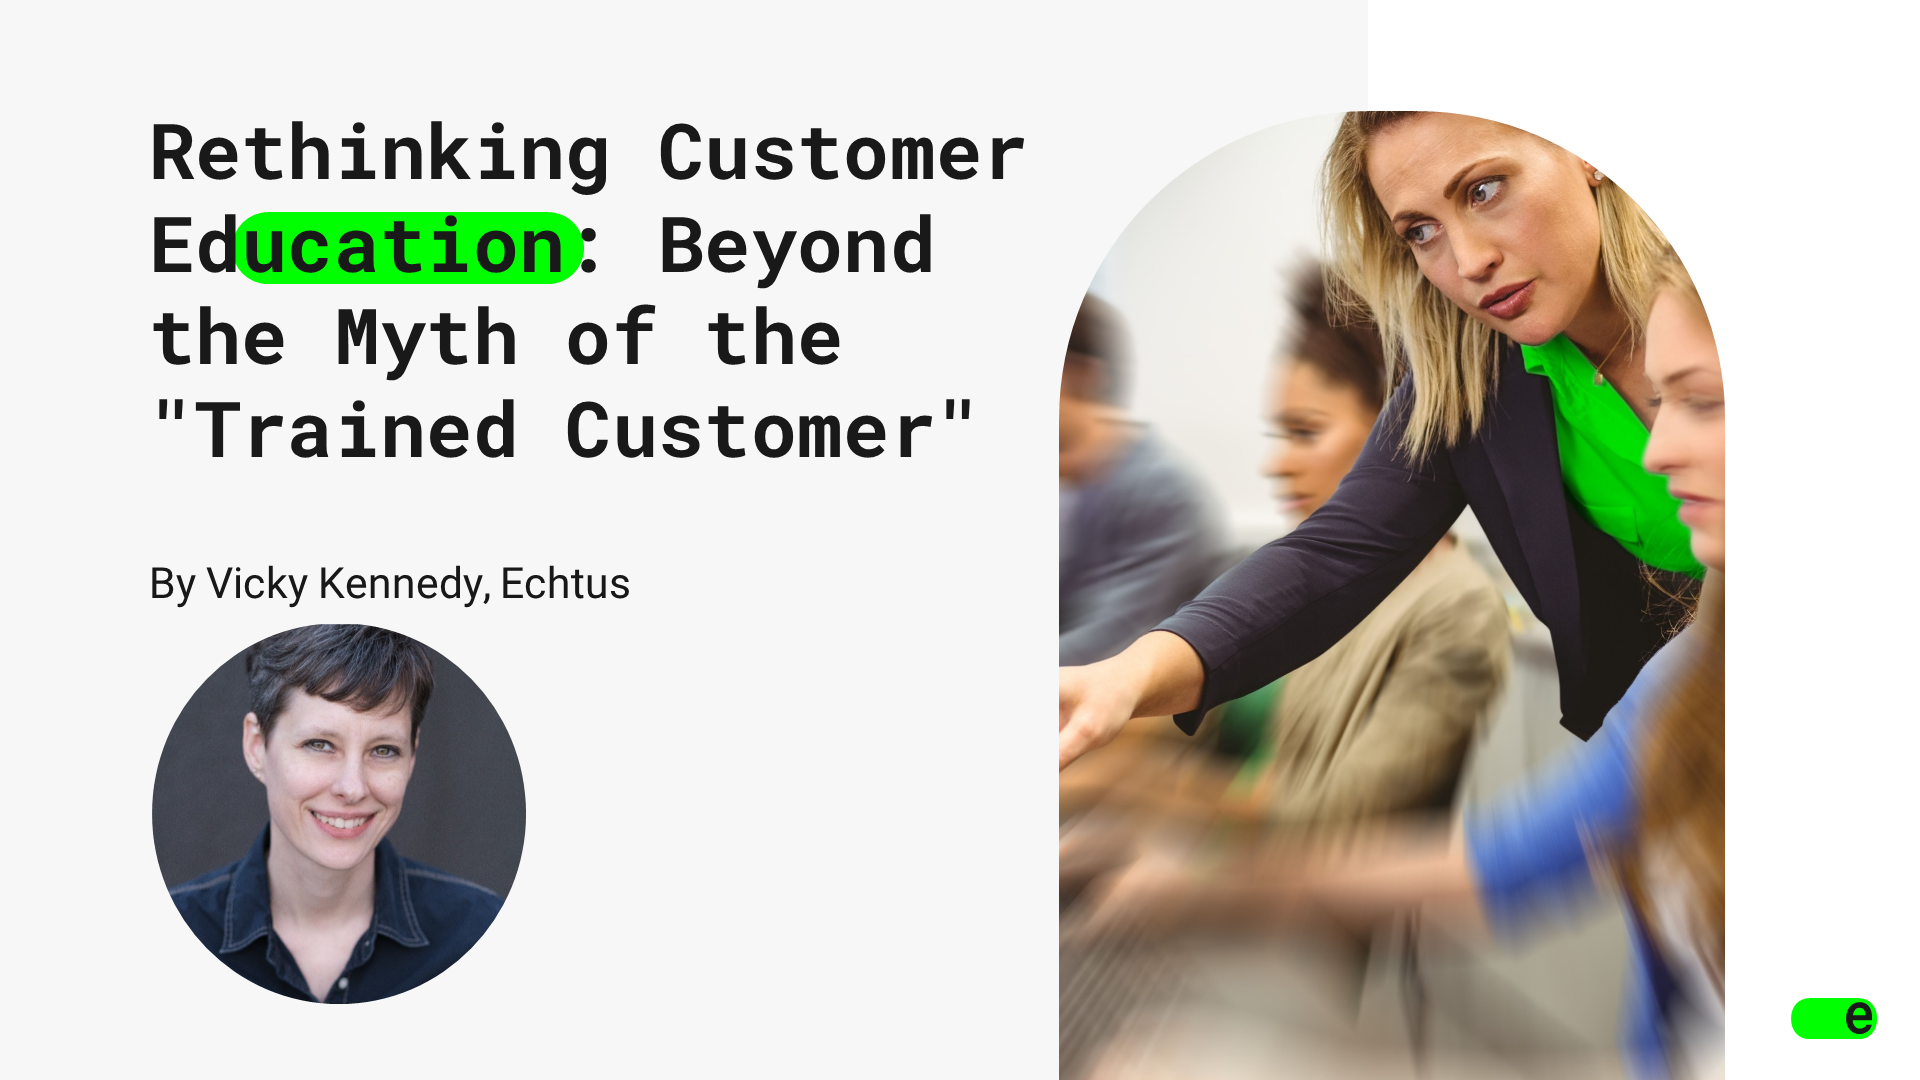 Rethinking Customer Education - Beyond the Myth of the Trained Customer